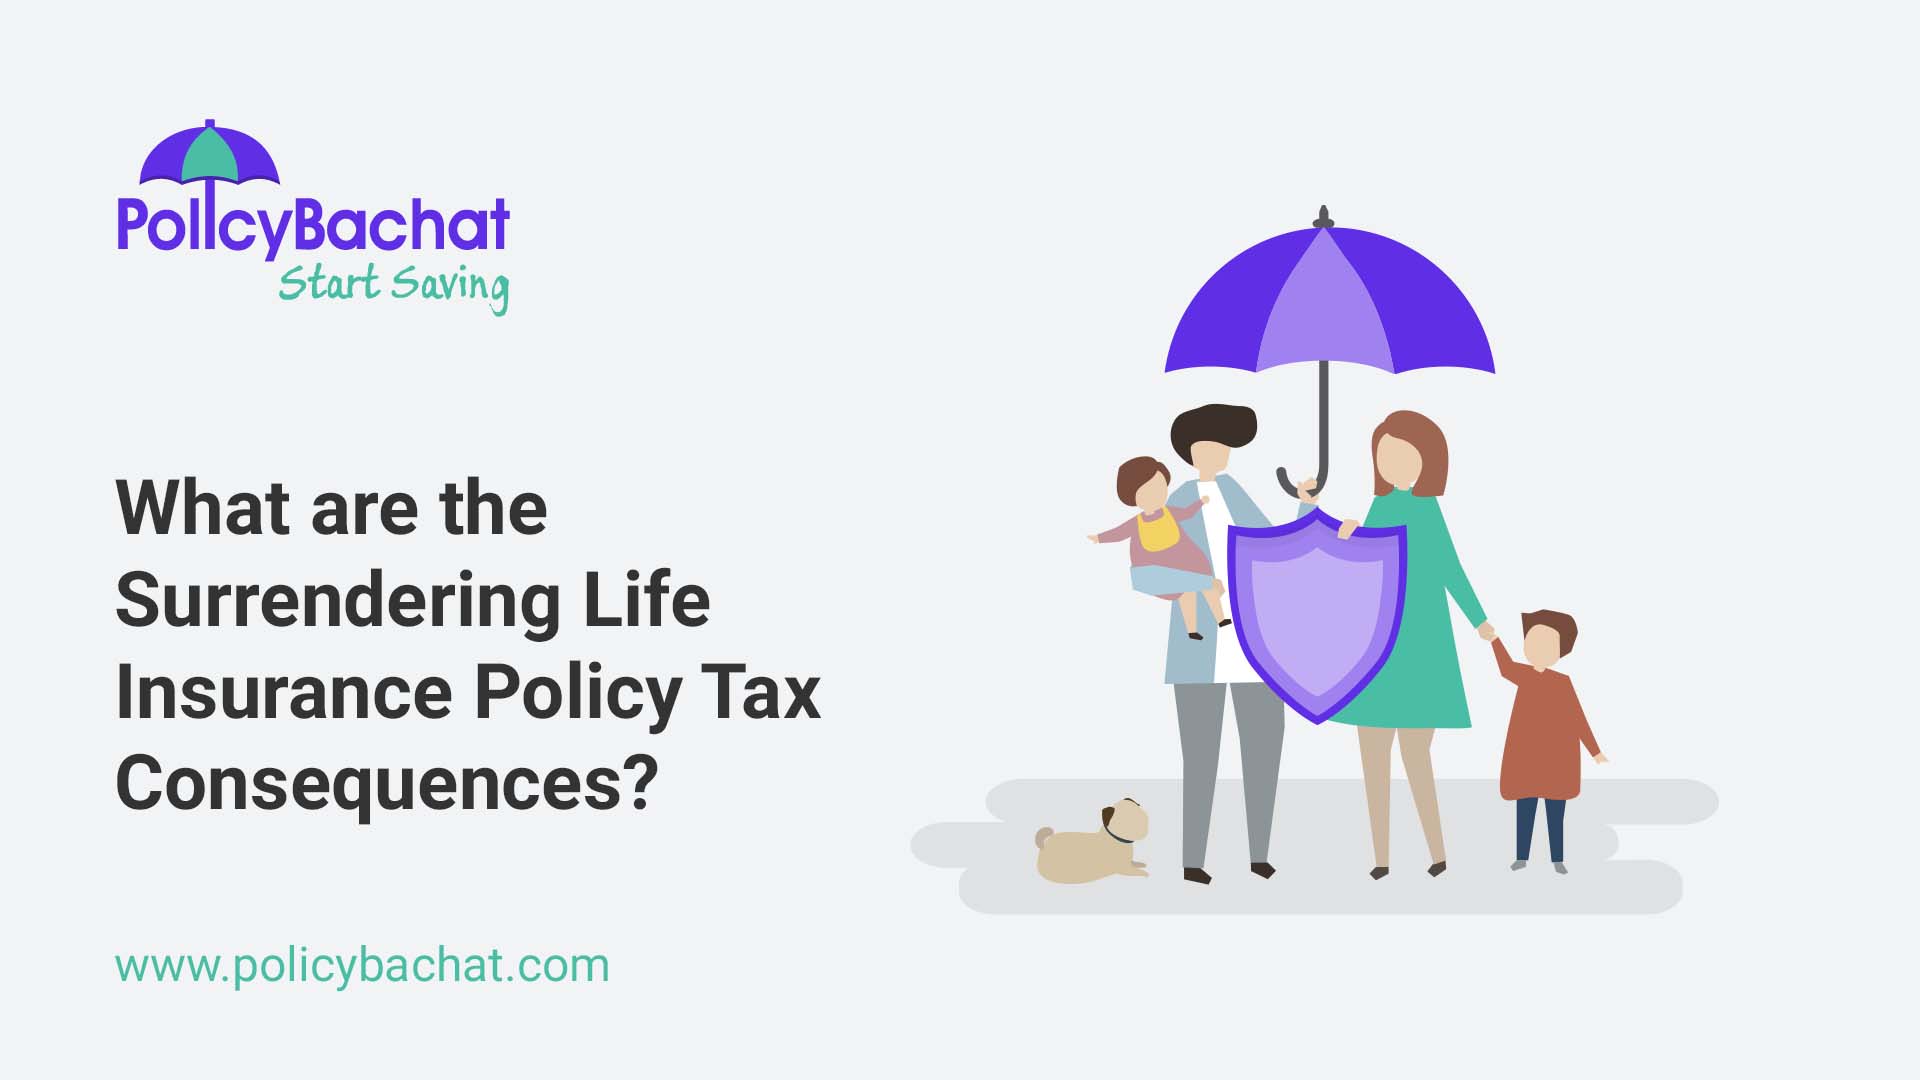 assignment of life insurance policy tax consequences